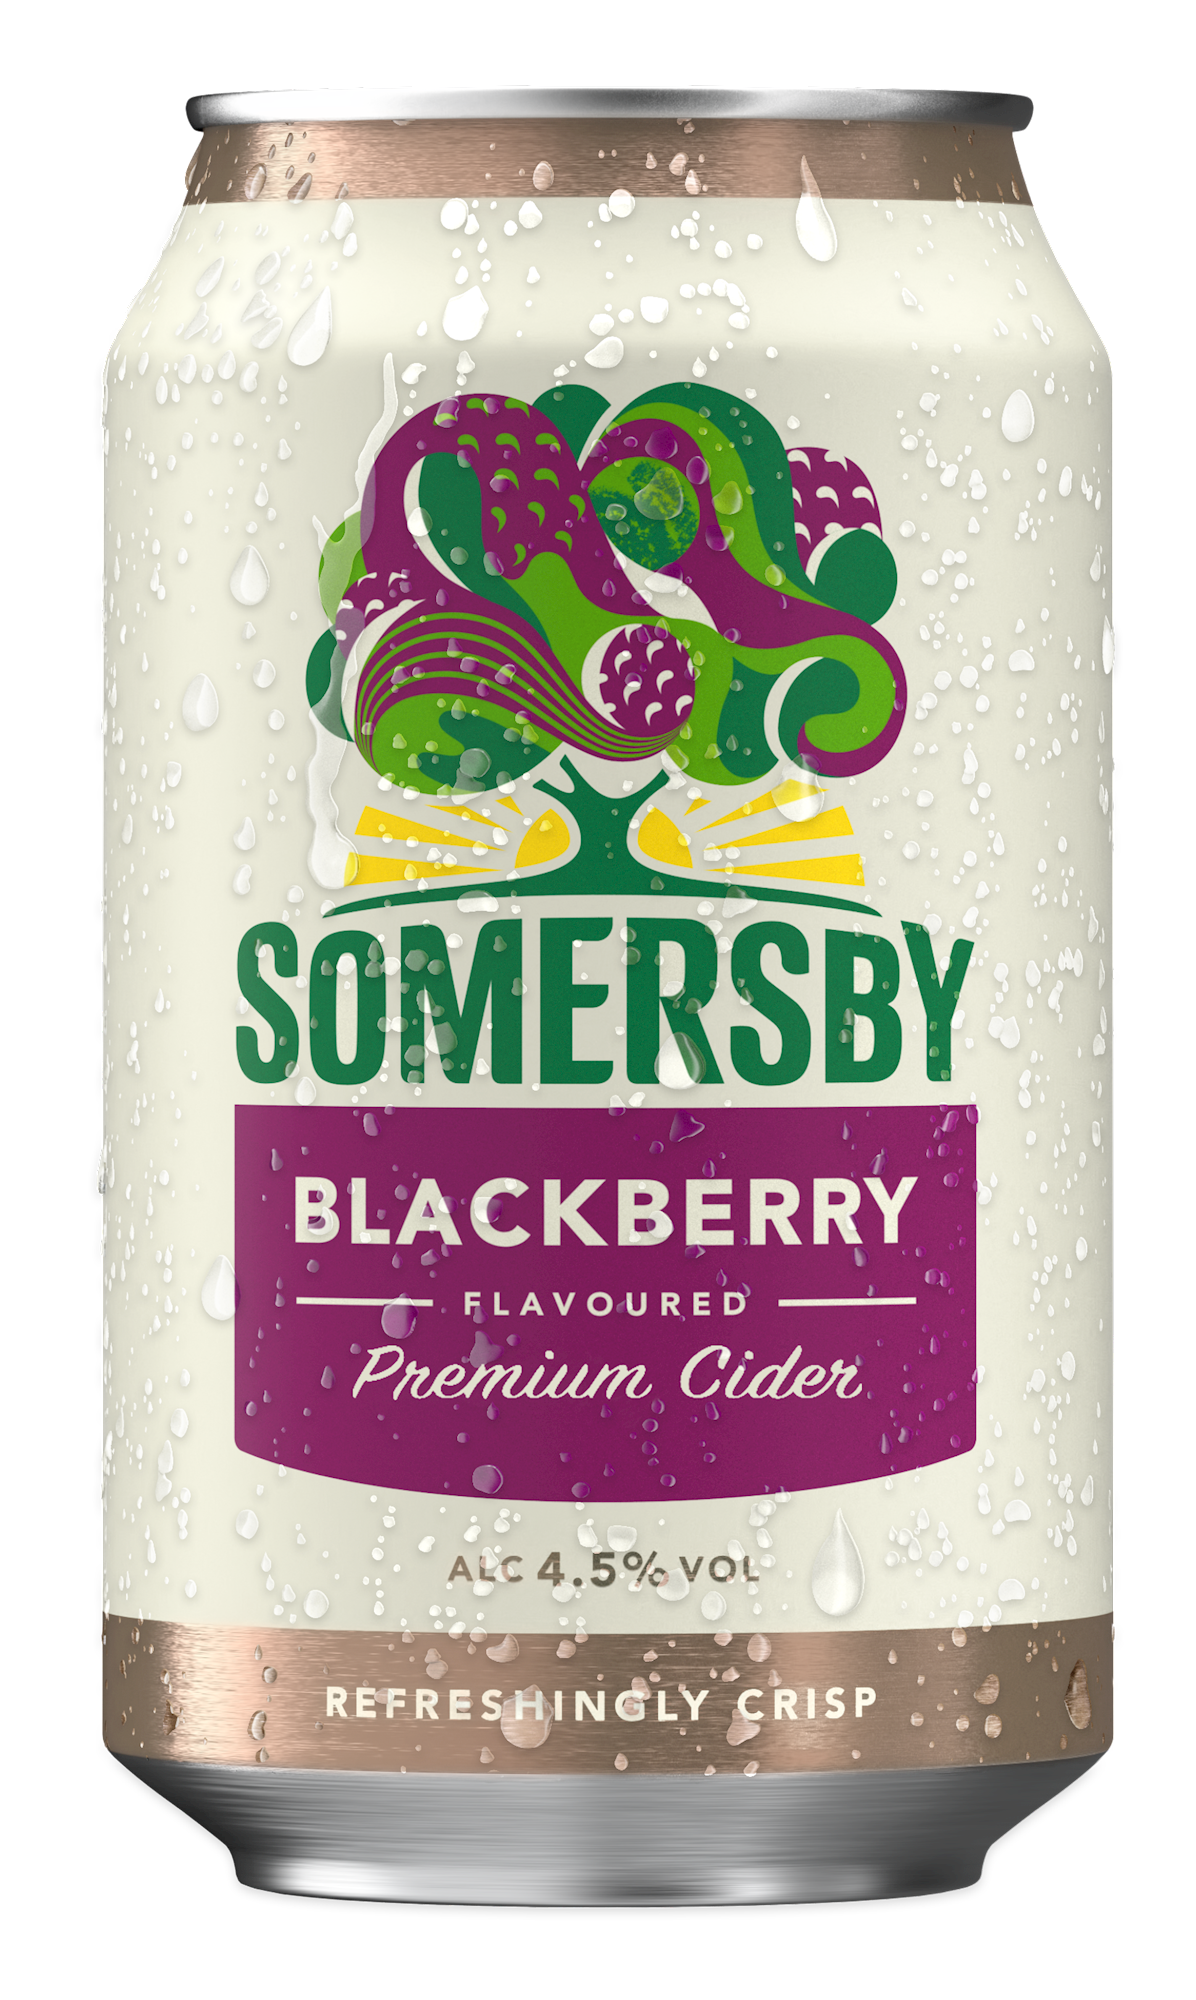 Somersby alcohol percentage